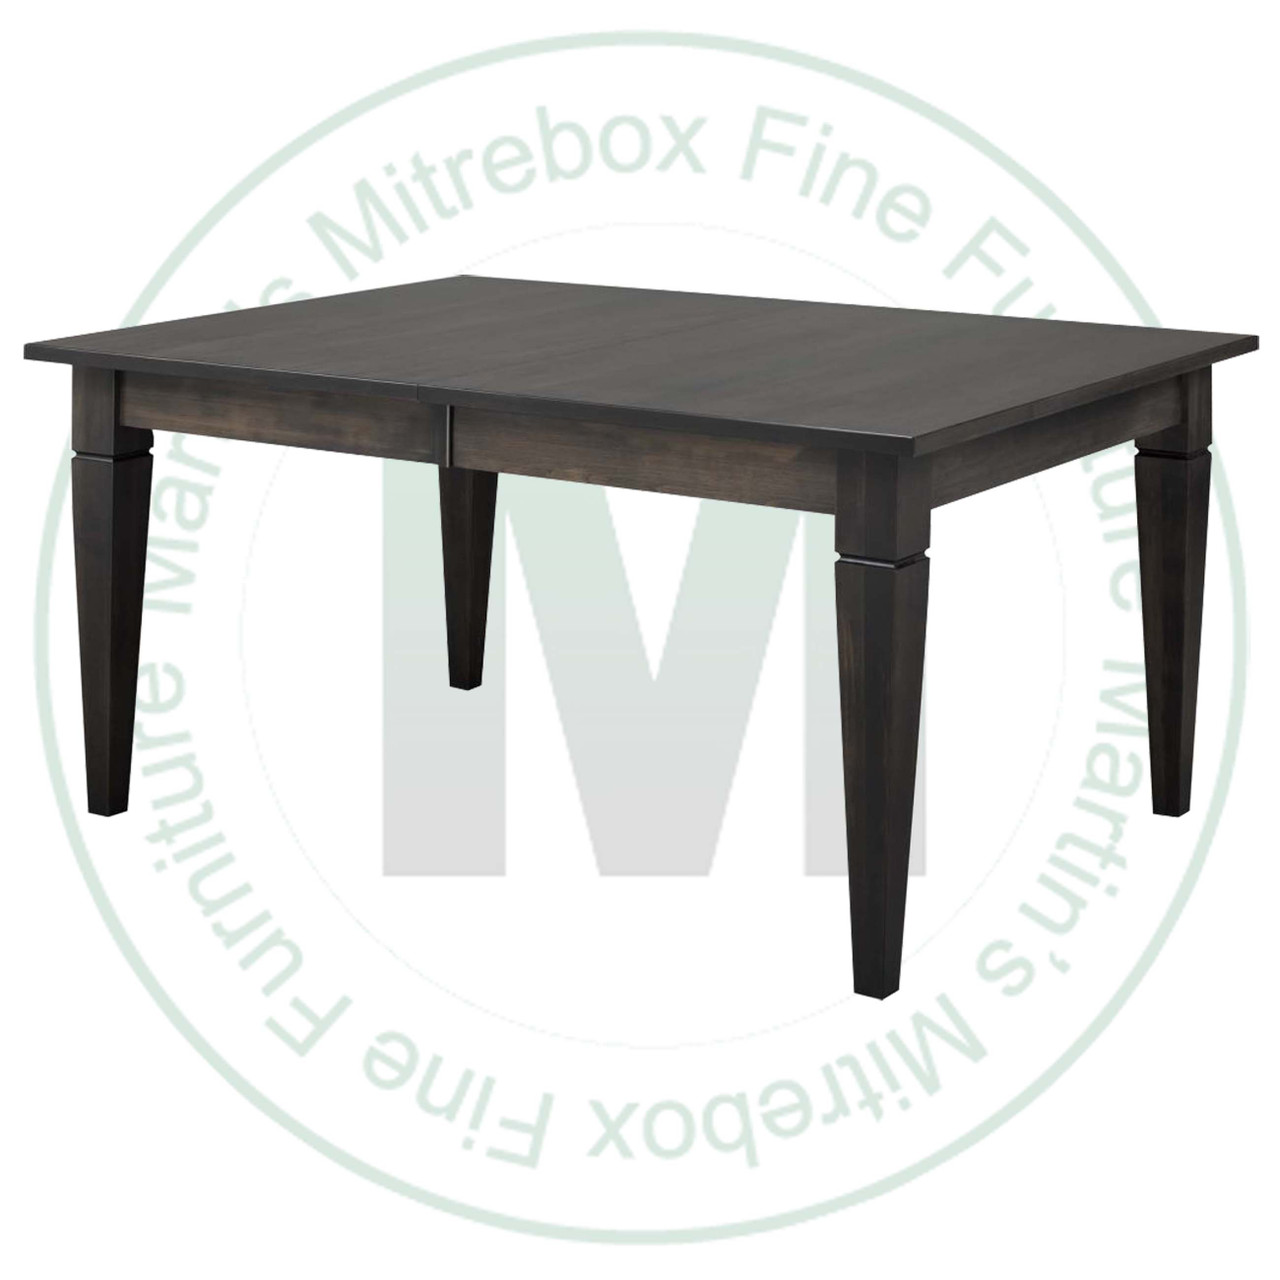 Wormy Maple Reesor Solid Top Harvest Table 48''D x 108''W x 30''H Table Has 1'' Thick Top And 2 - 16'' Extensions